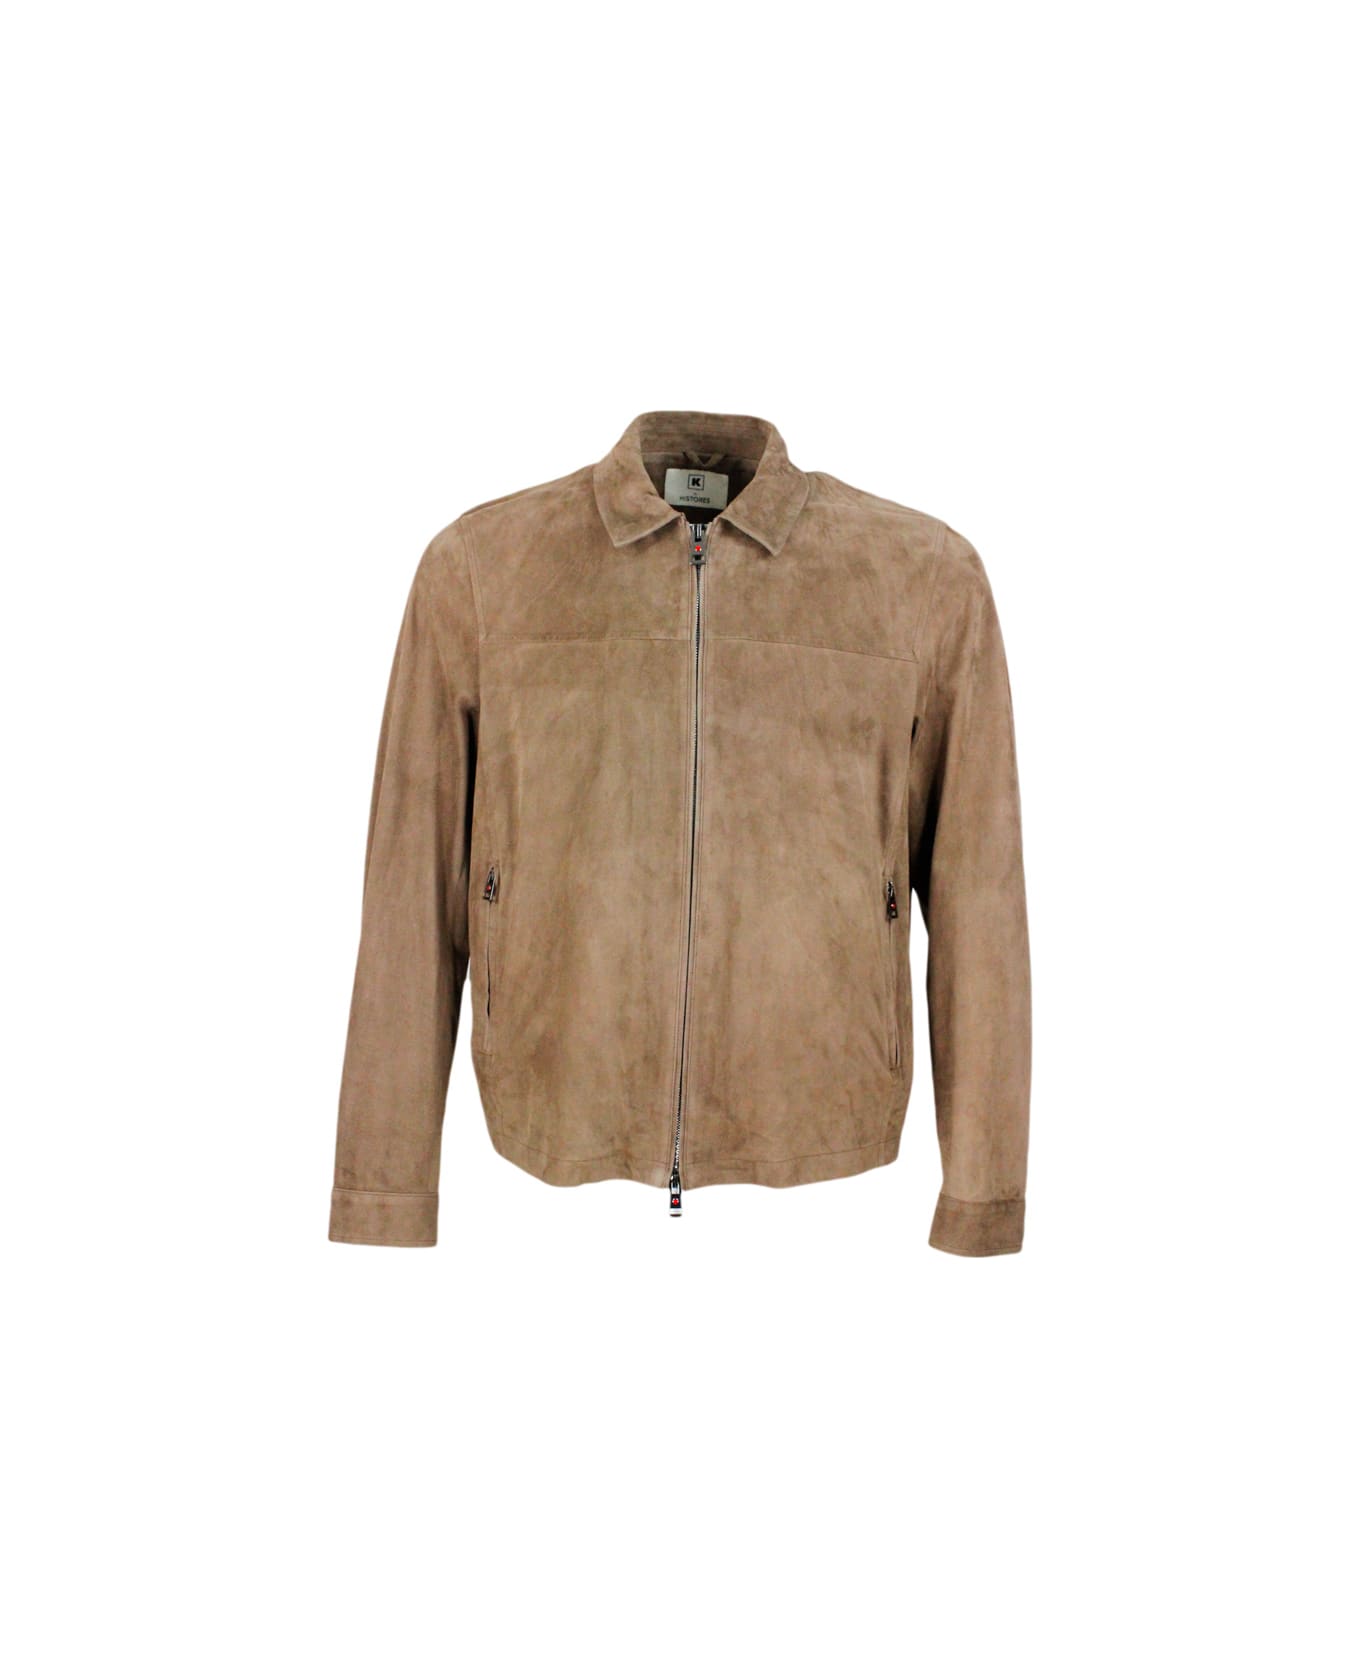 Kired Lightweight Unlined Jacket In Very Soft Suede With Shirt Collar And Zip Closure - Beige - dove  レザージャケット